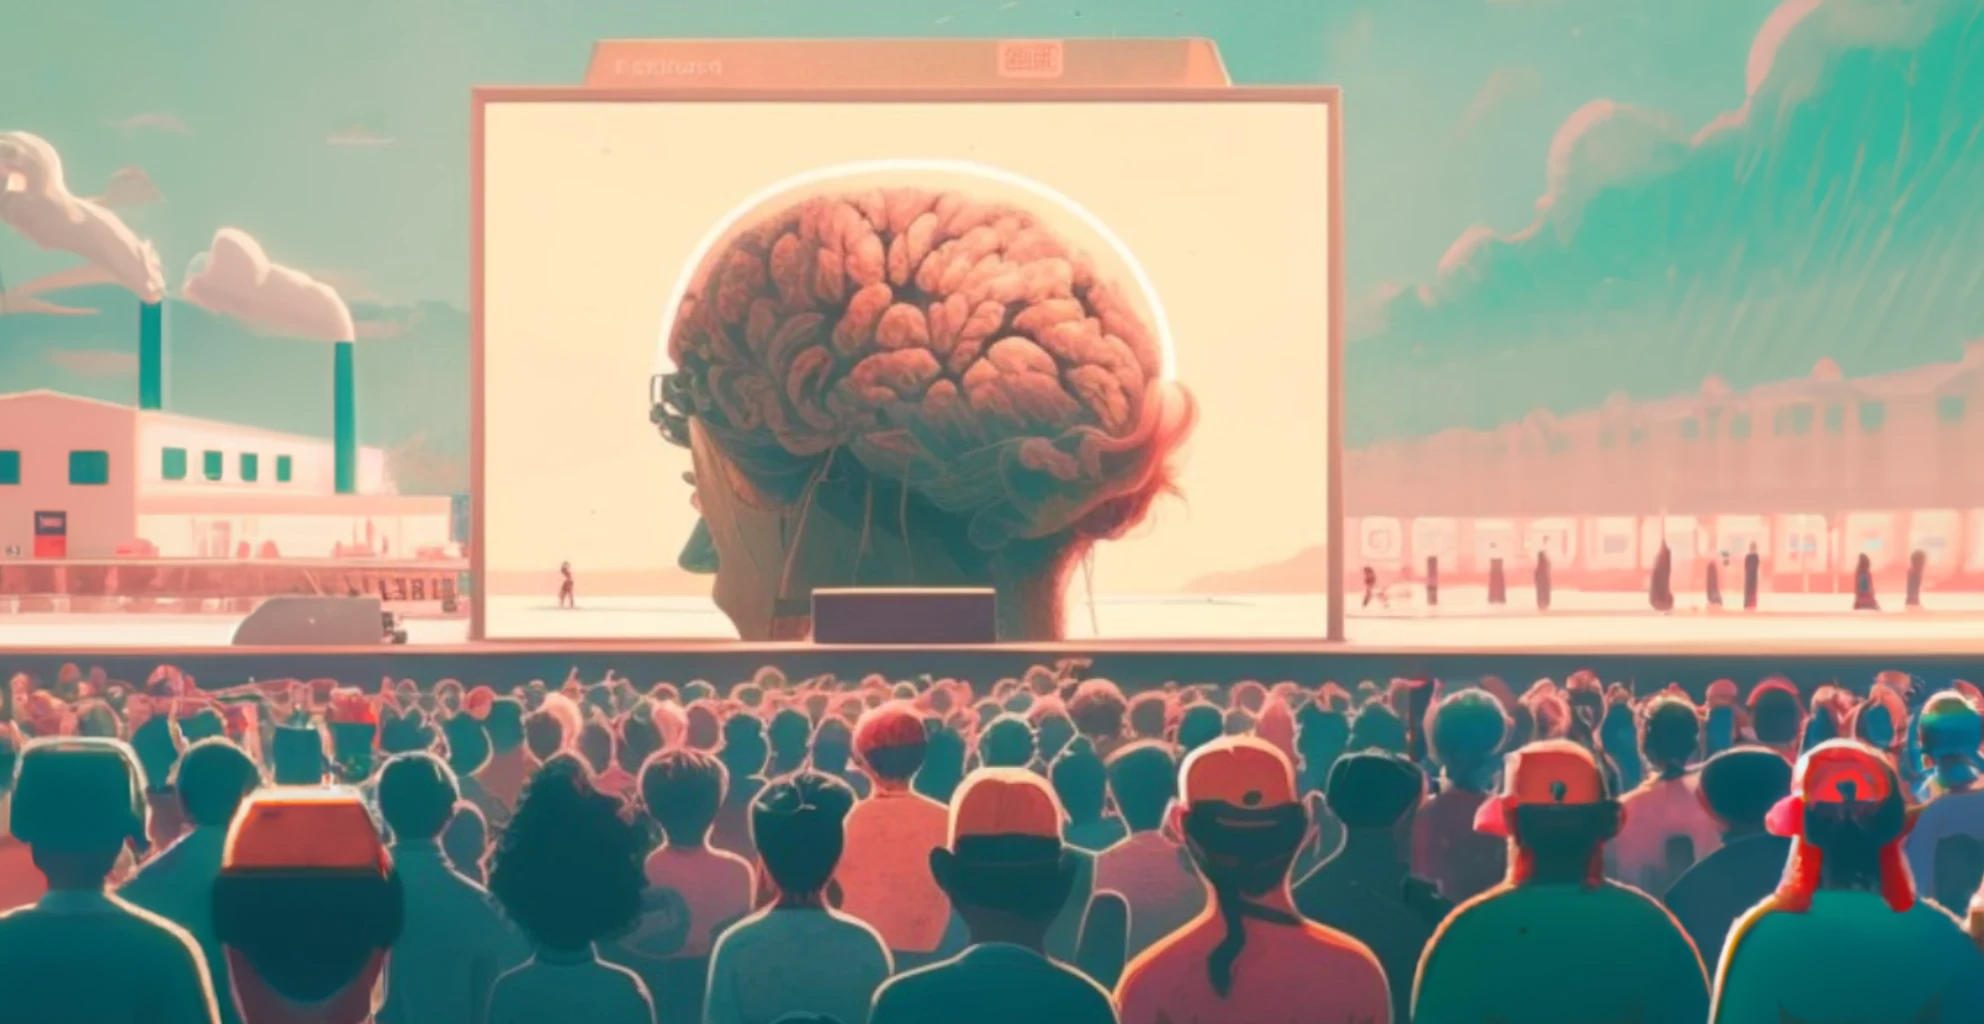 An AI-generated image of a crowd of people looking towards a stage in the distance. On it is a large screen showing a brain.